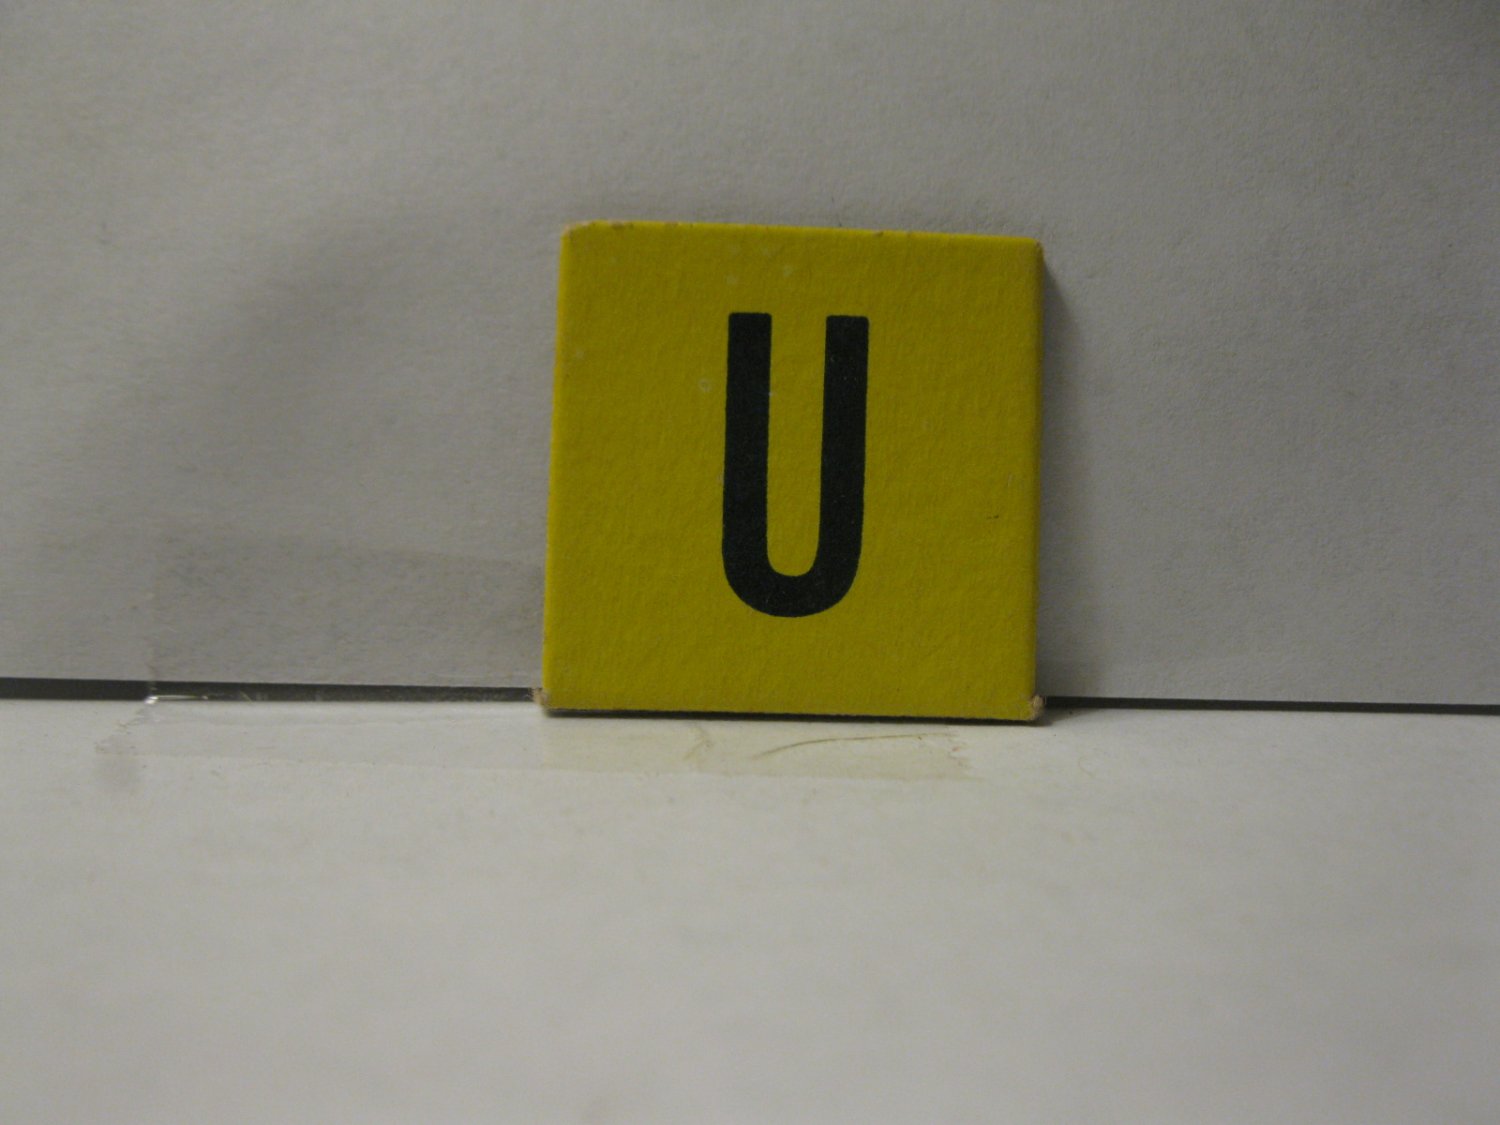 1958 Scrabble for Juniors Board Game Piece: Letter Tab - U